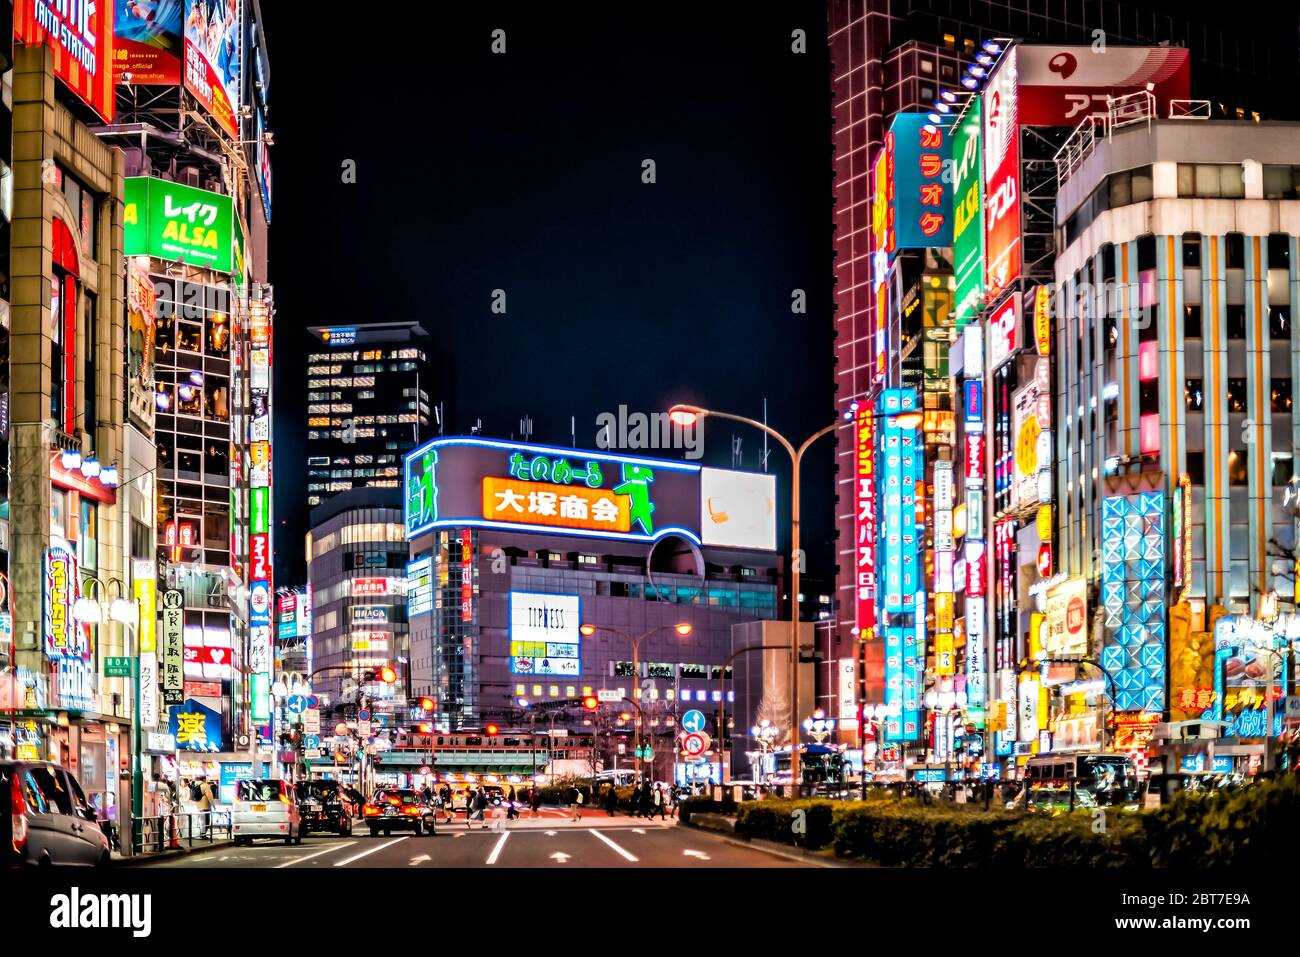 Tokyo, Japan - April 3, 2019: Yasukuni-dori avenue with cars people by Kabukicho alley street in downtown city with neon night lights cityscape Stock Photo